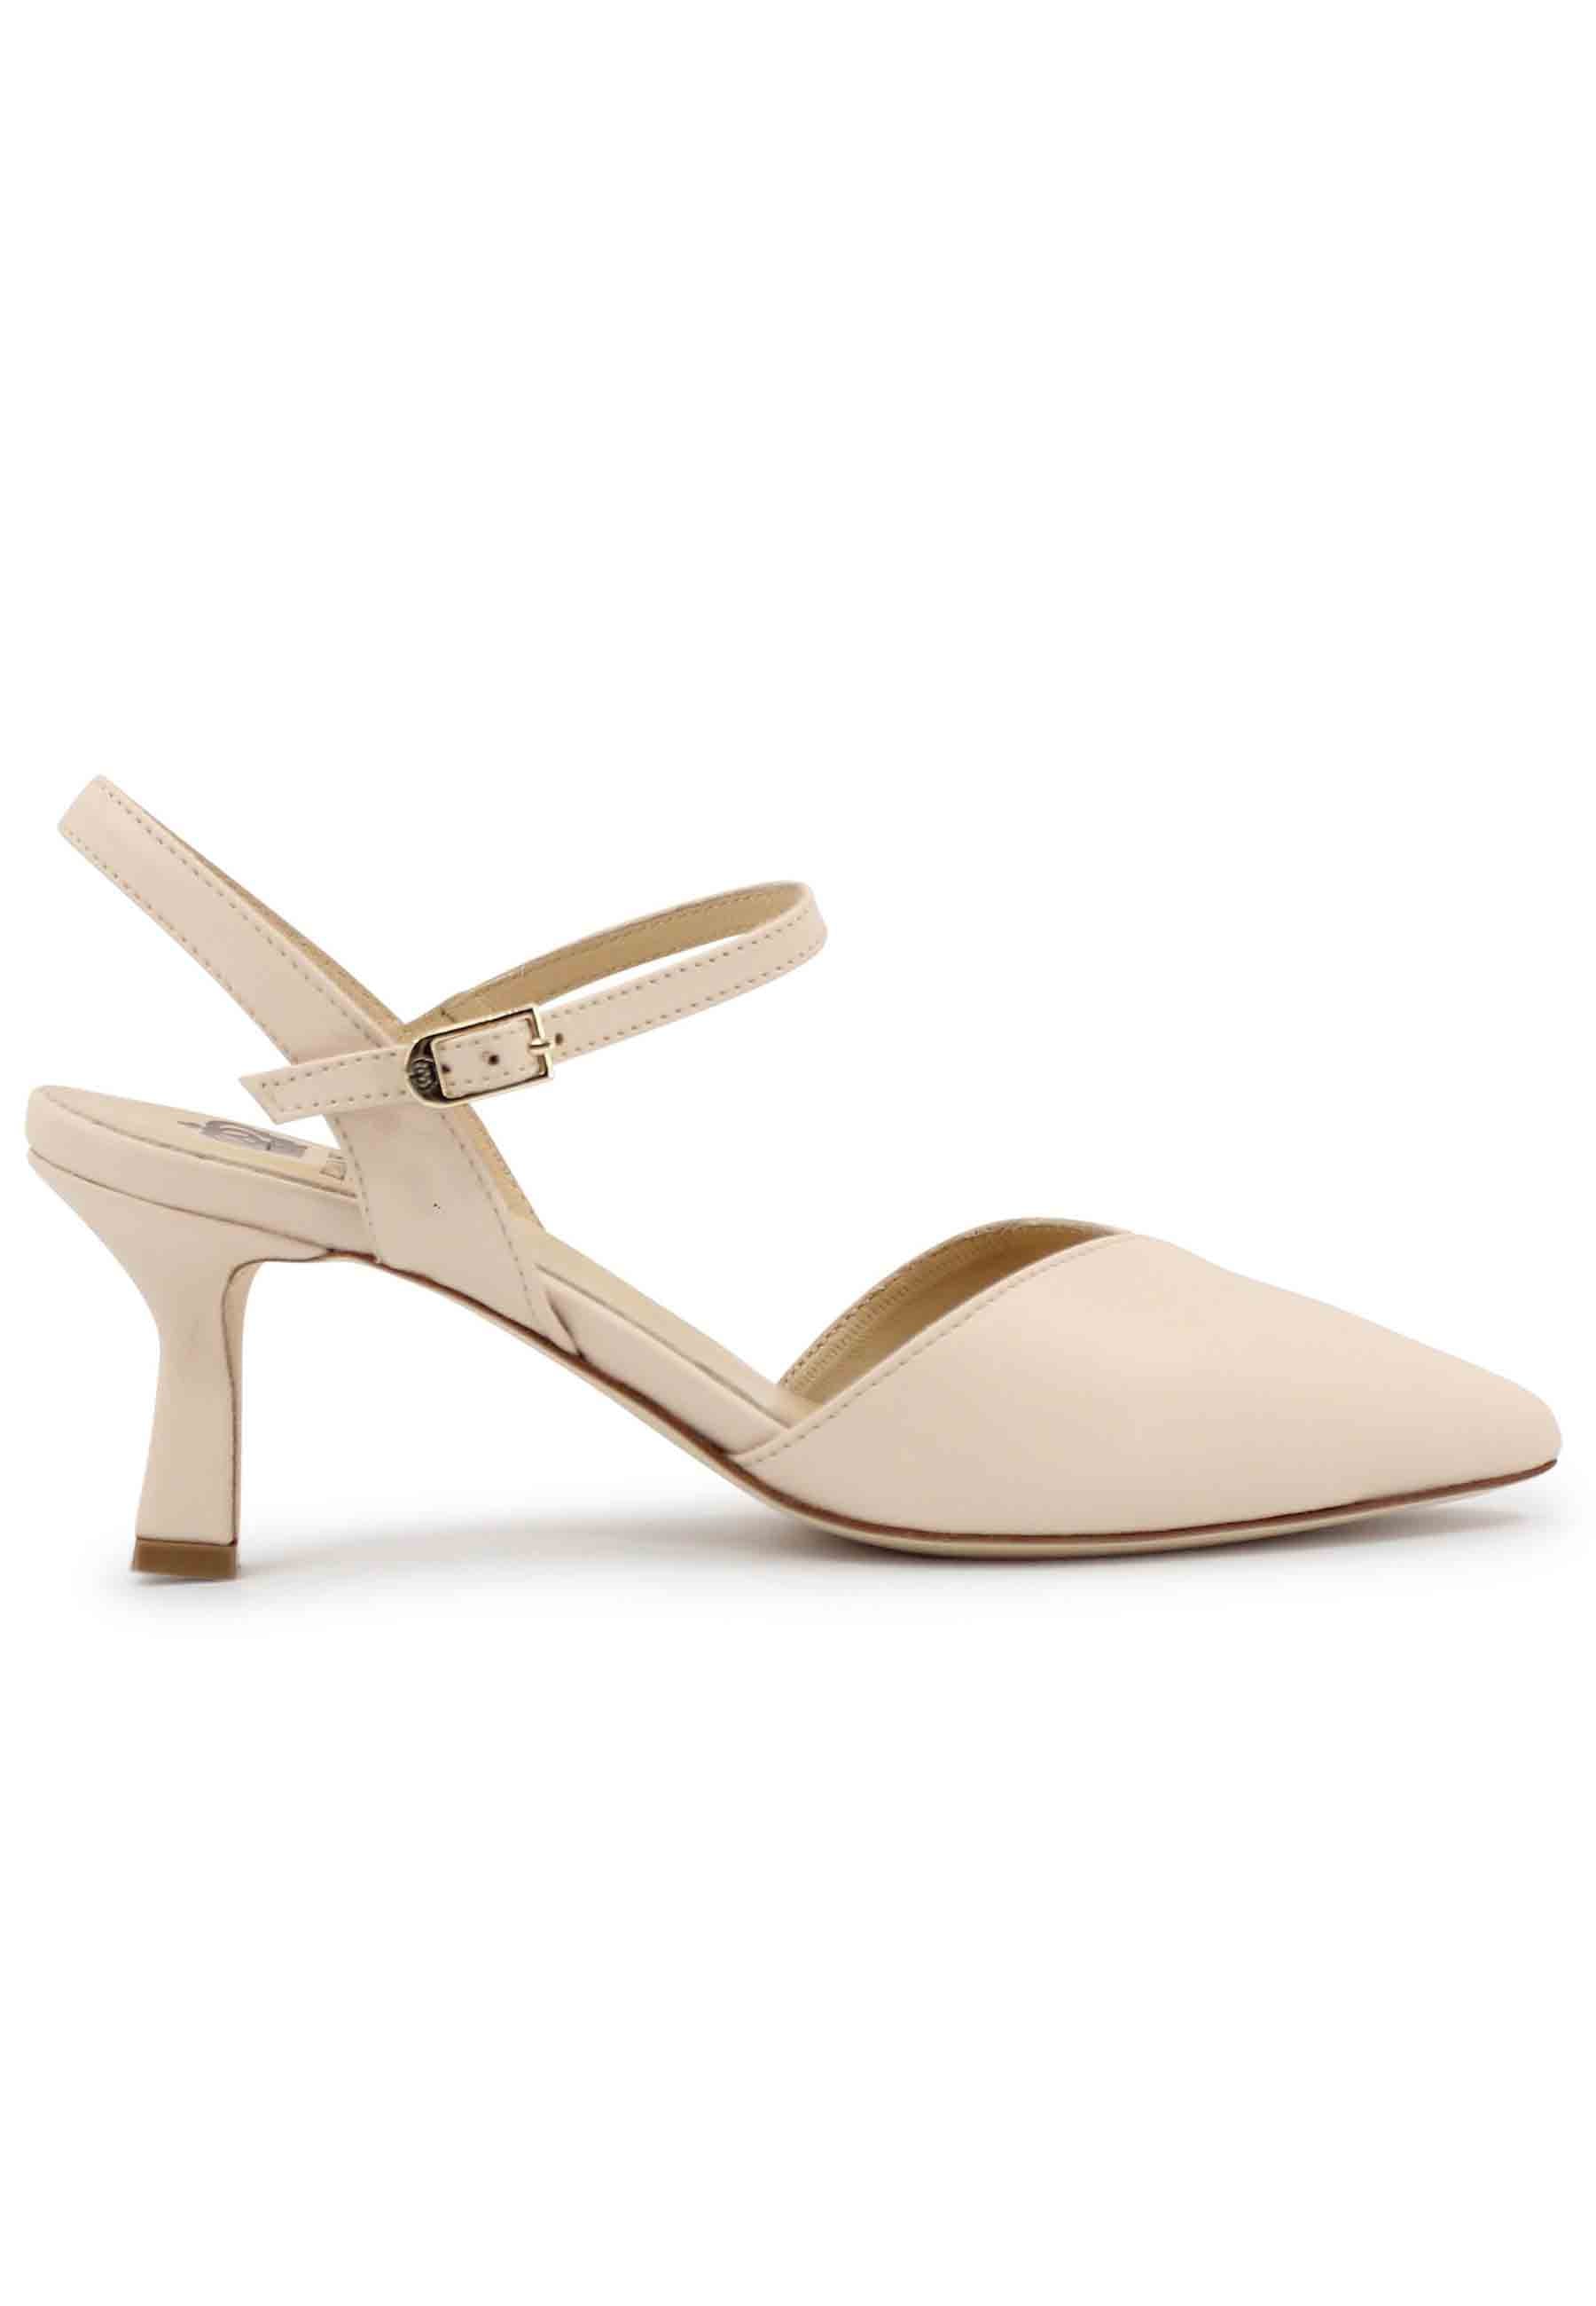 Women's beige leather sandals with ankle strap